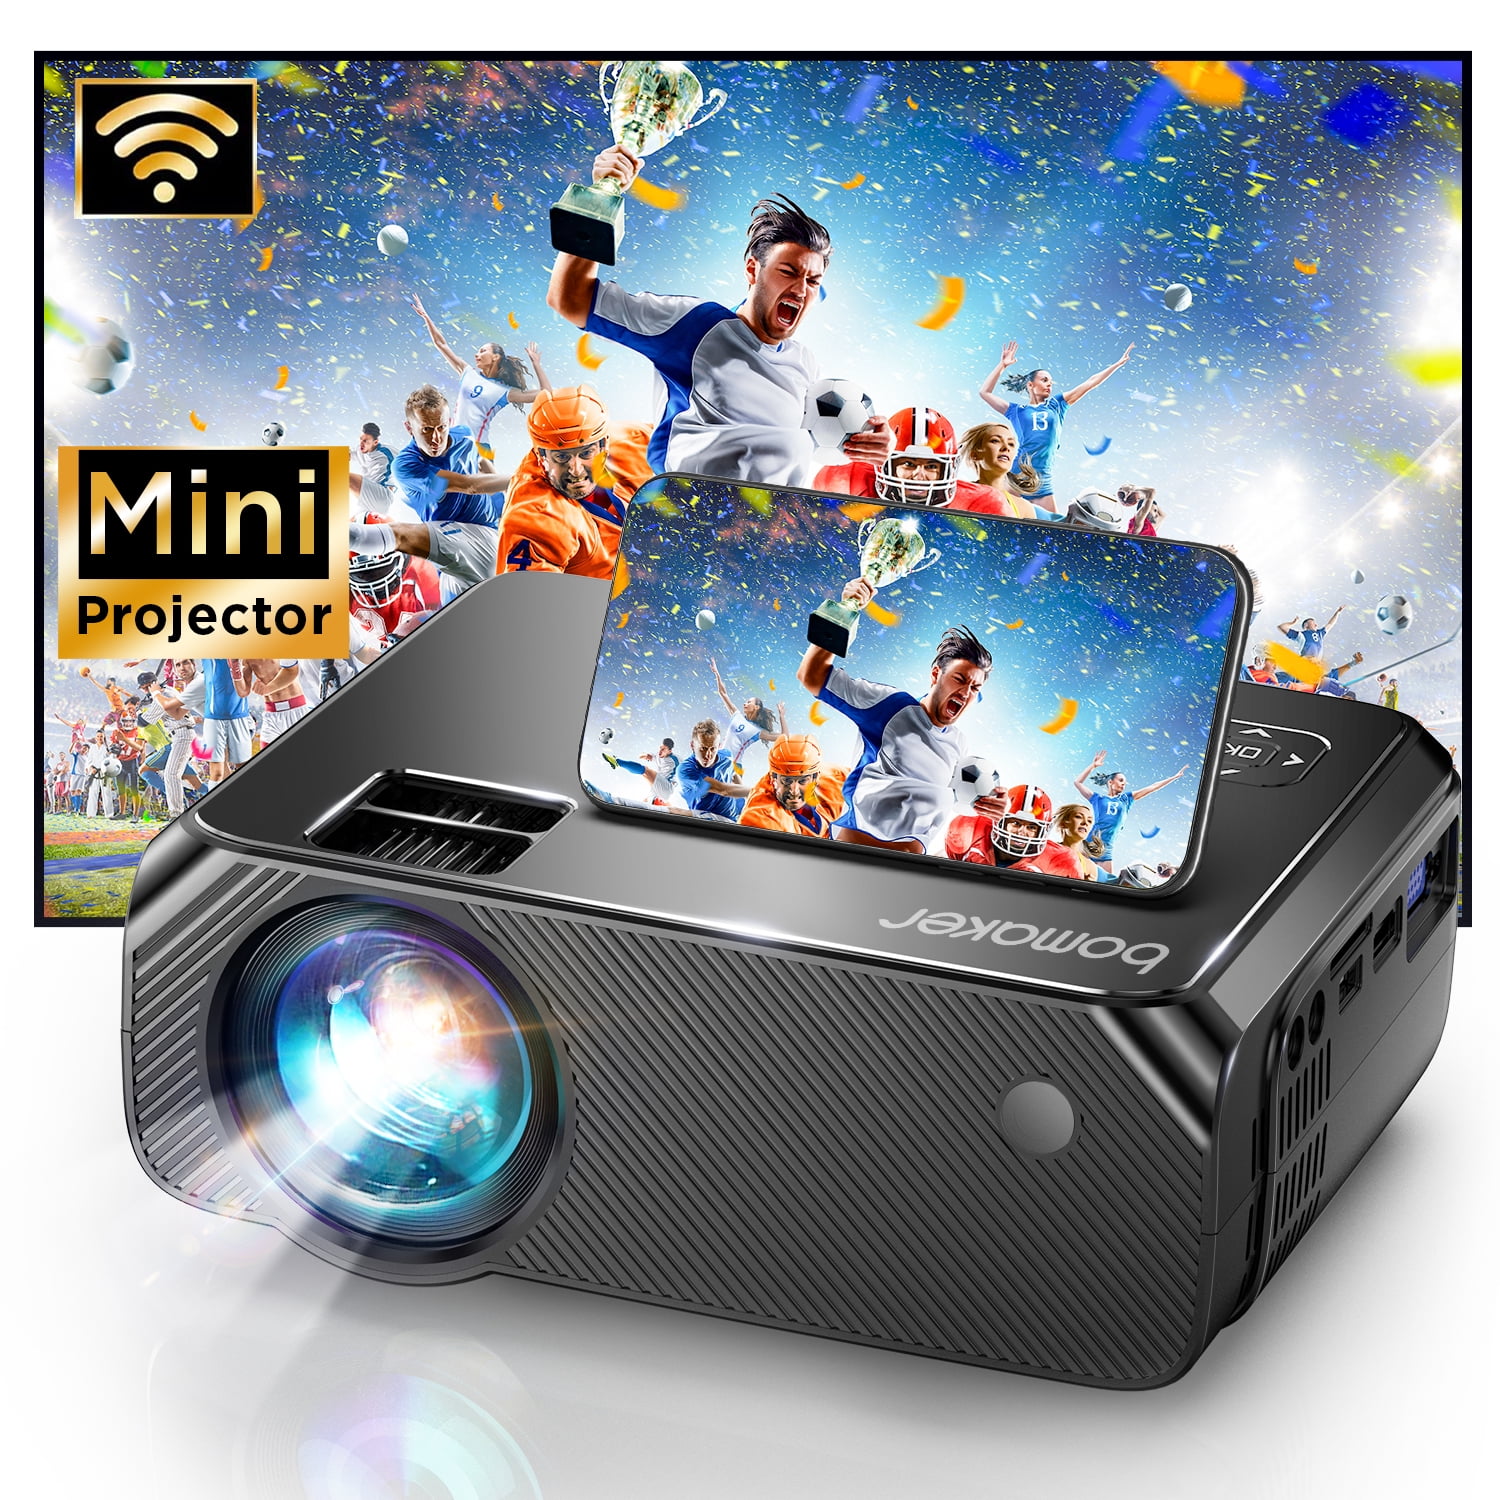 Groview 100 Class FHD (1080p) LED Projector